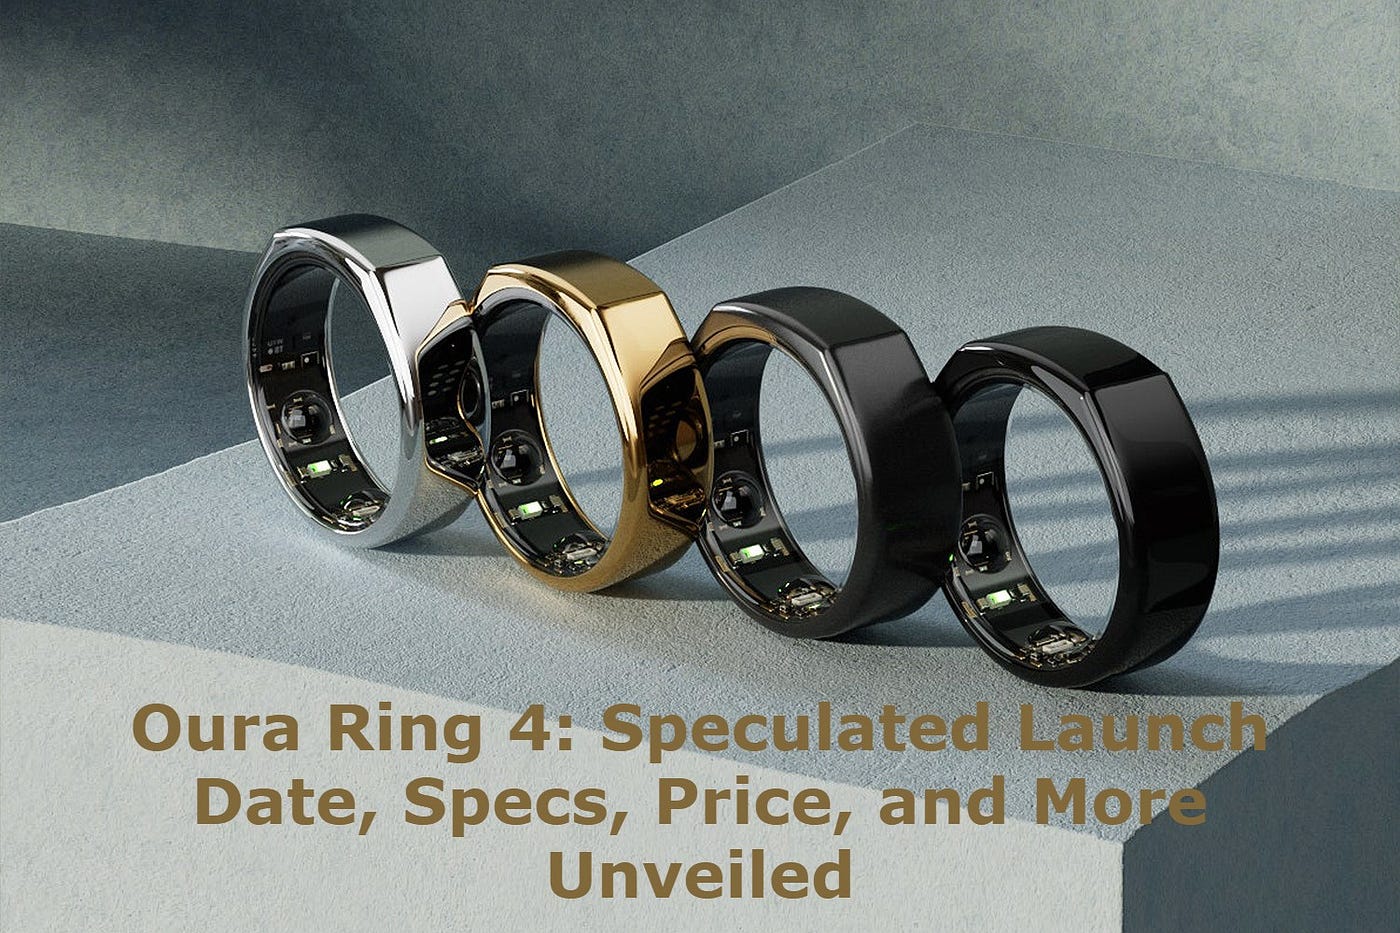 Oura Ring 4: Speculated Launch Date, Specs, Price, and More Unveiled - Tech  India News - Medium